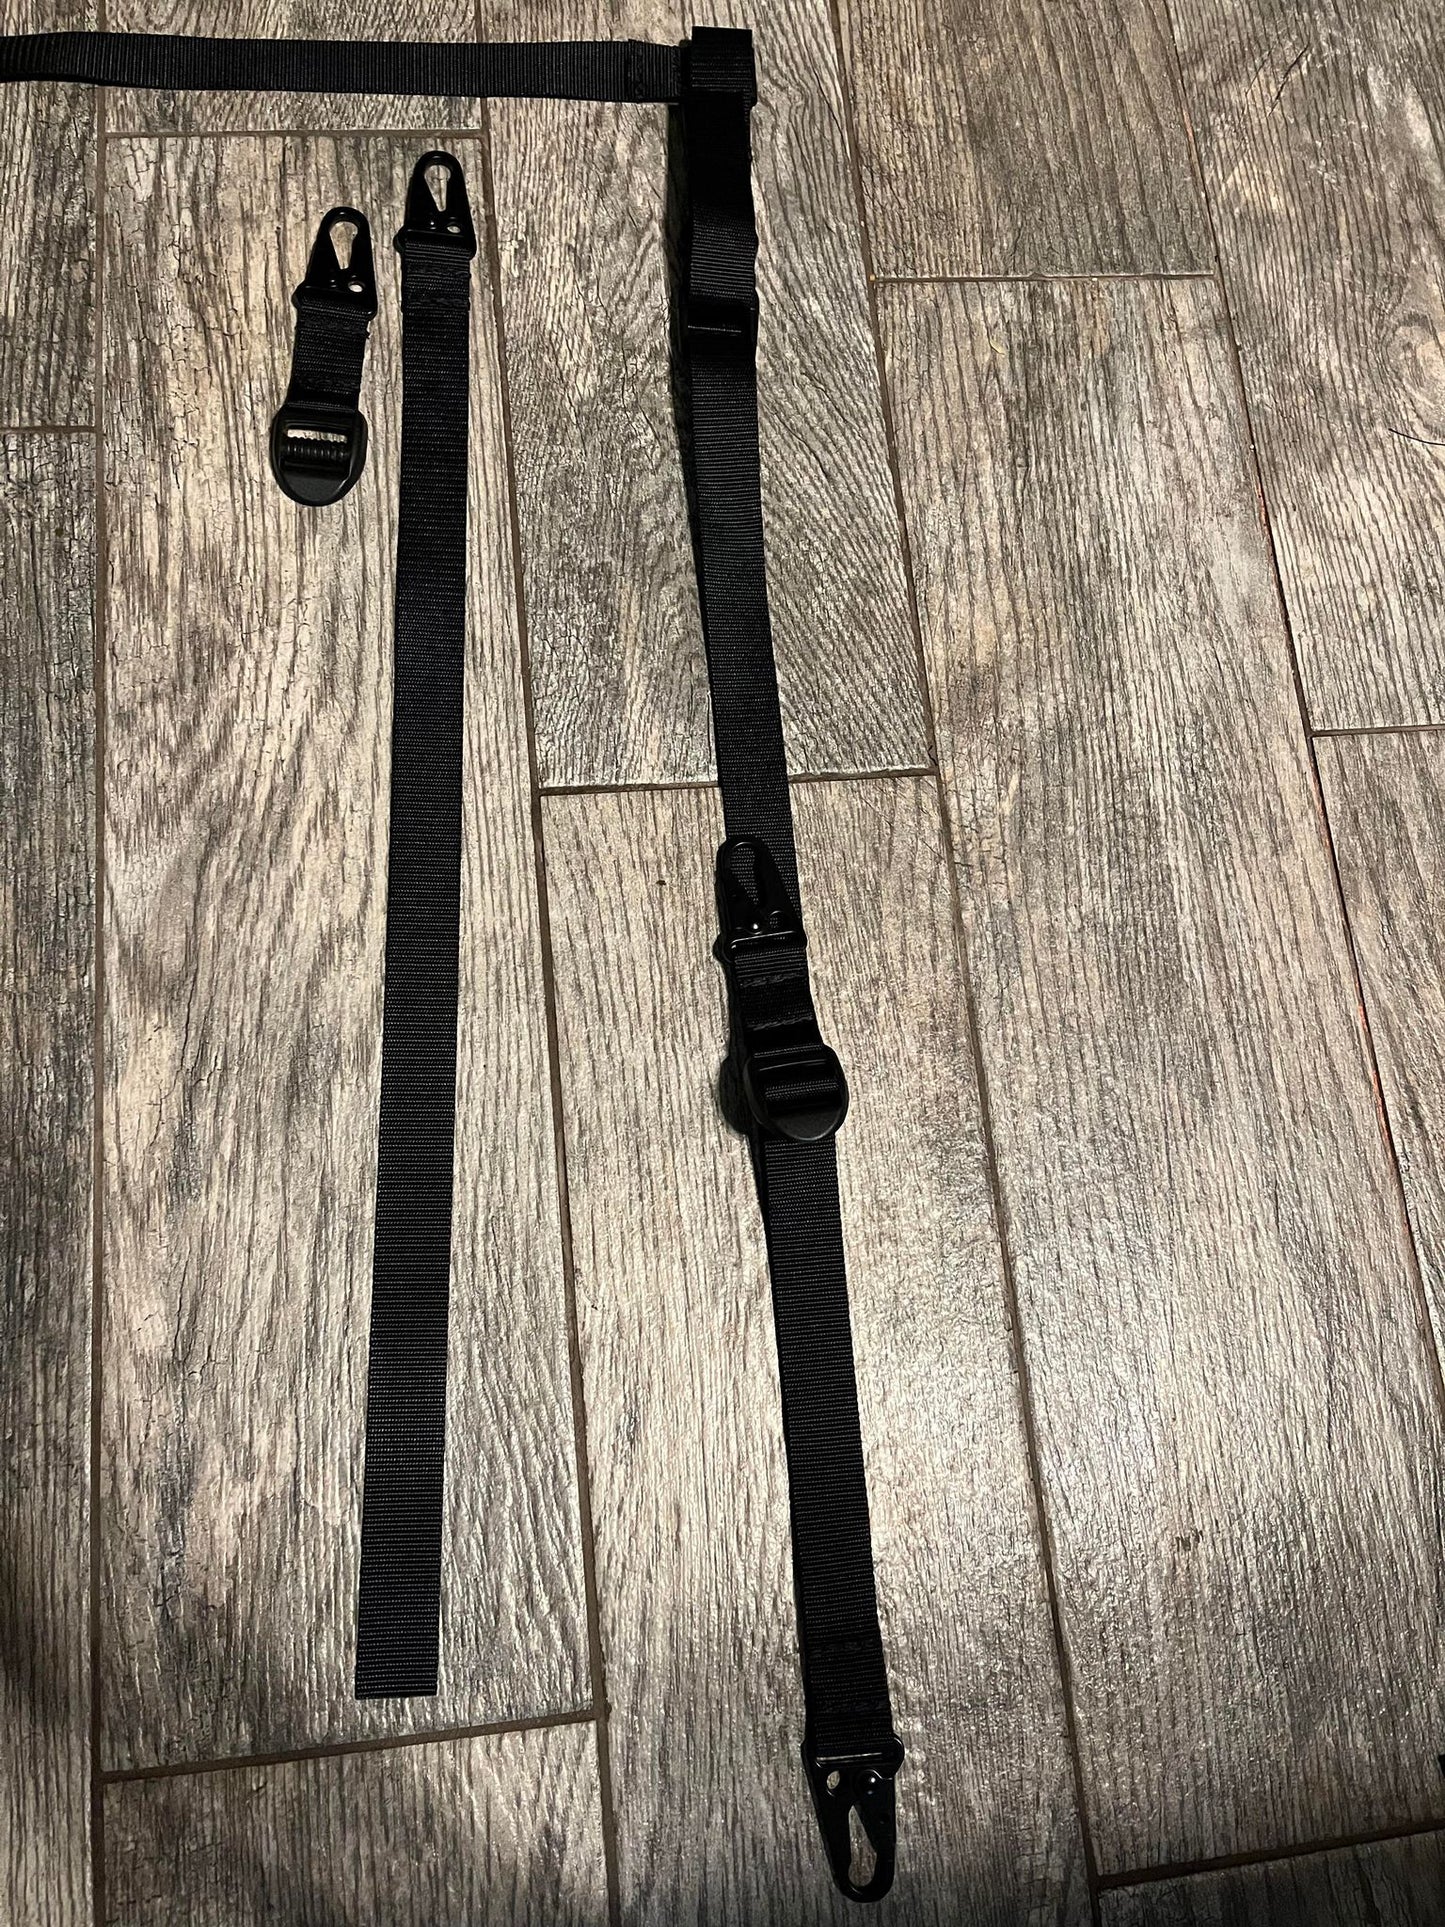 Replacement strap and buckle strap kit